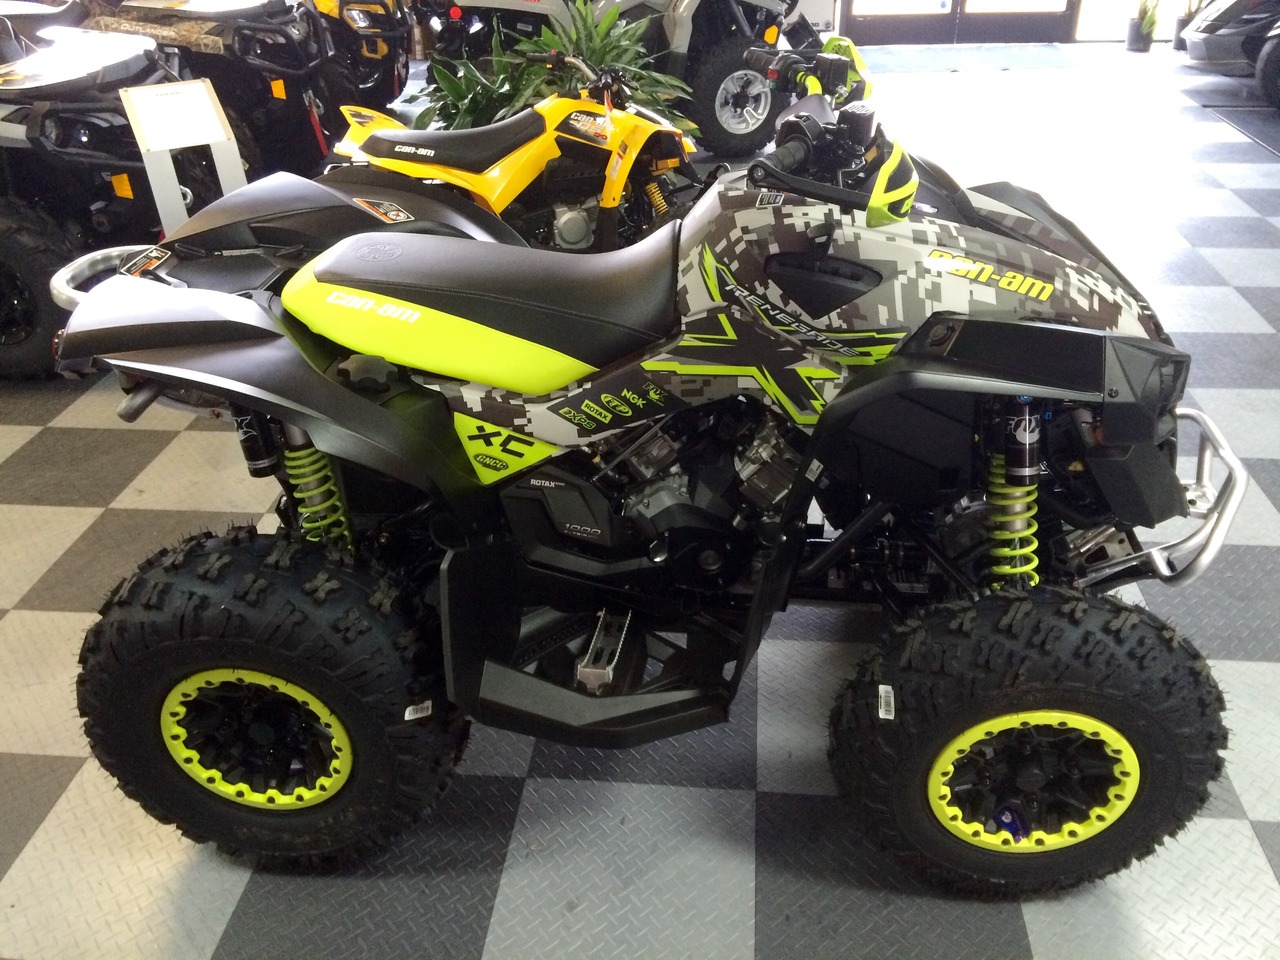 2015 BRP Can-Am Renegade 1000 XXC.